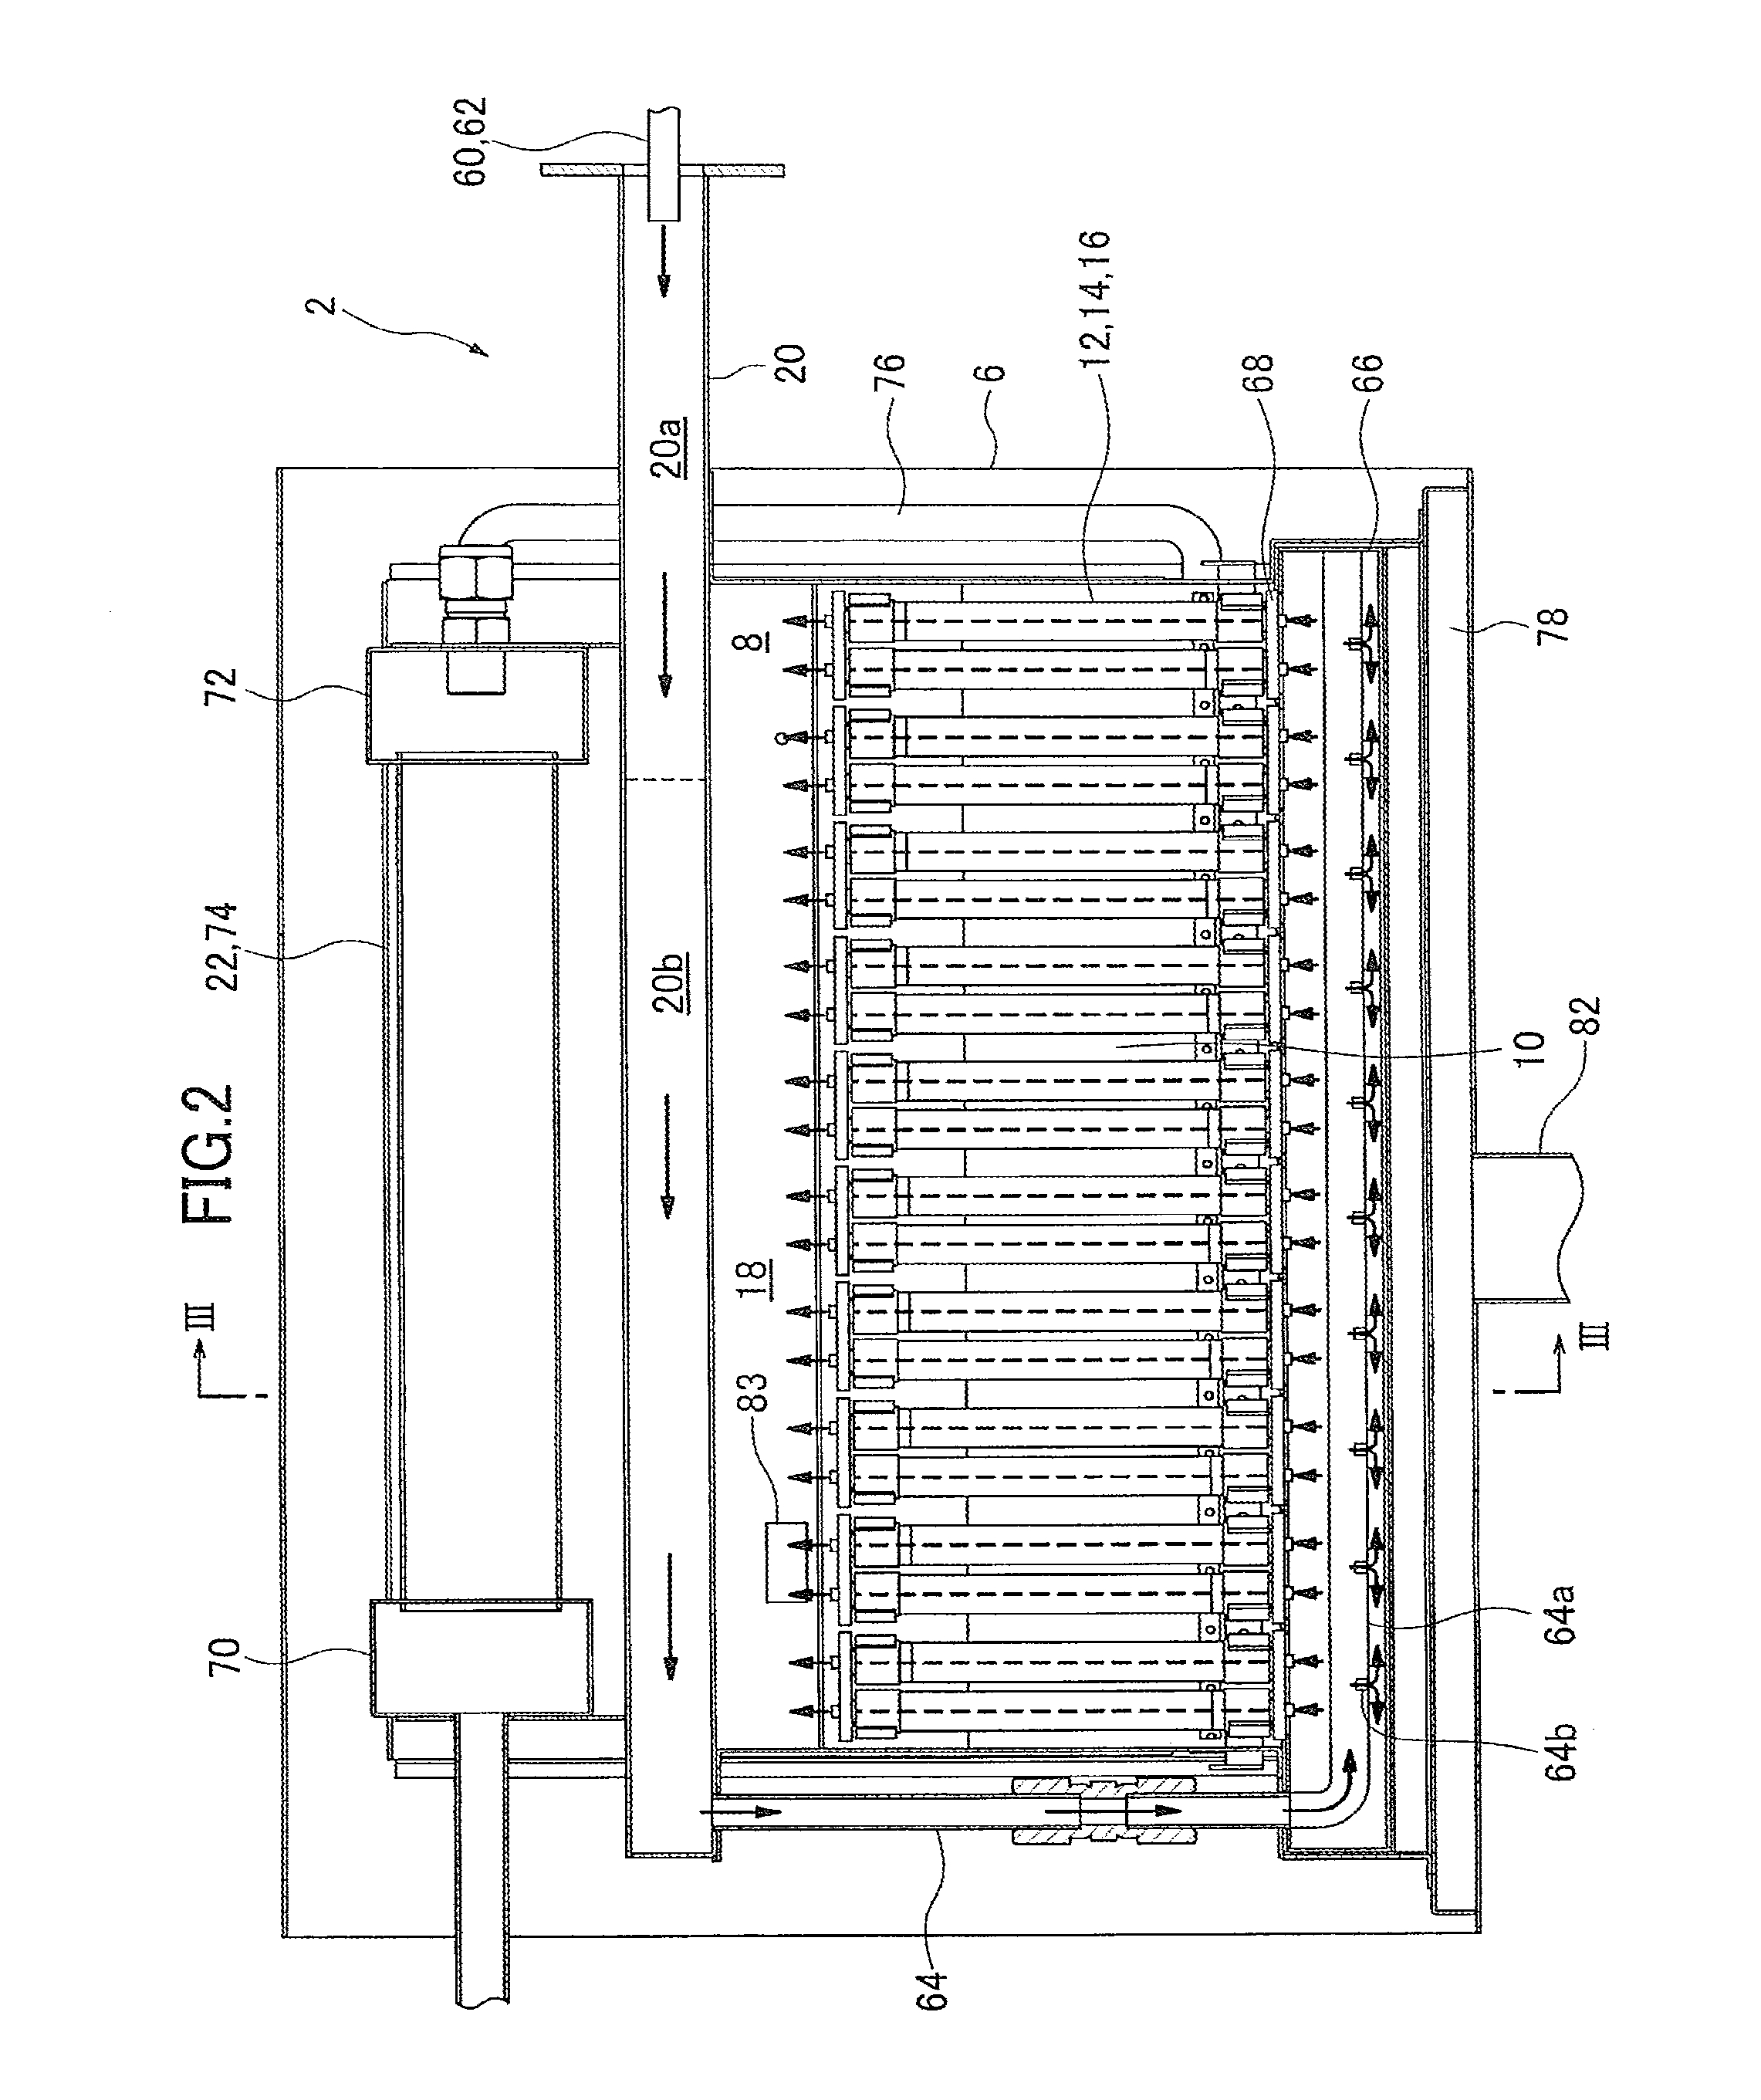 Method for Producing Cerium-Based Composite Oxide, Solid Oxide Fuel Cell, and Fuel Cell System